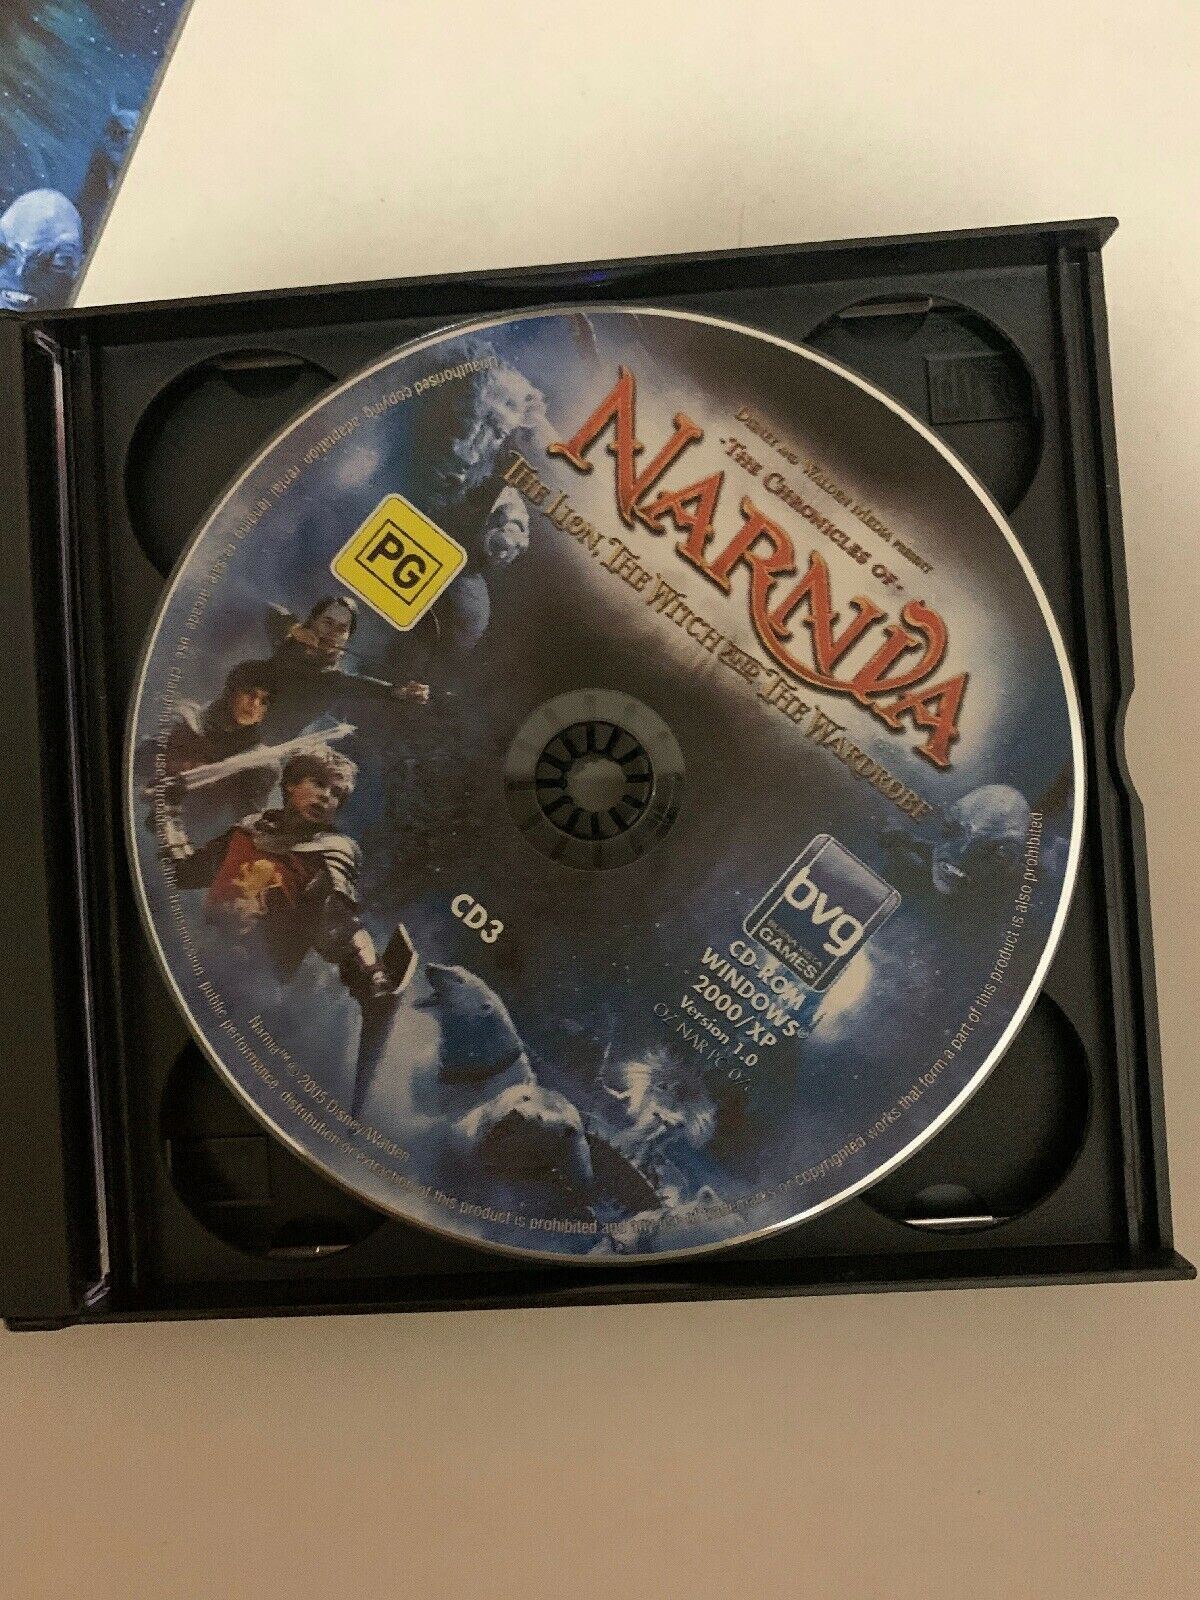 Chronicles of Narnia: Lion Witch Wardrobe - PC Windows Game (2005) With Manual